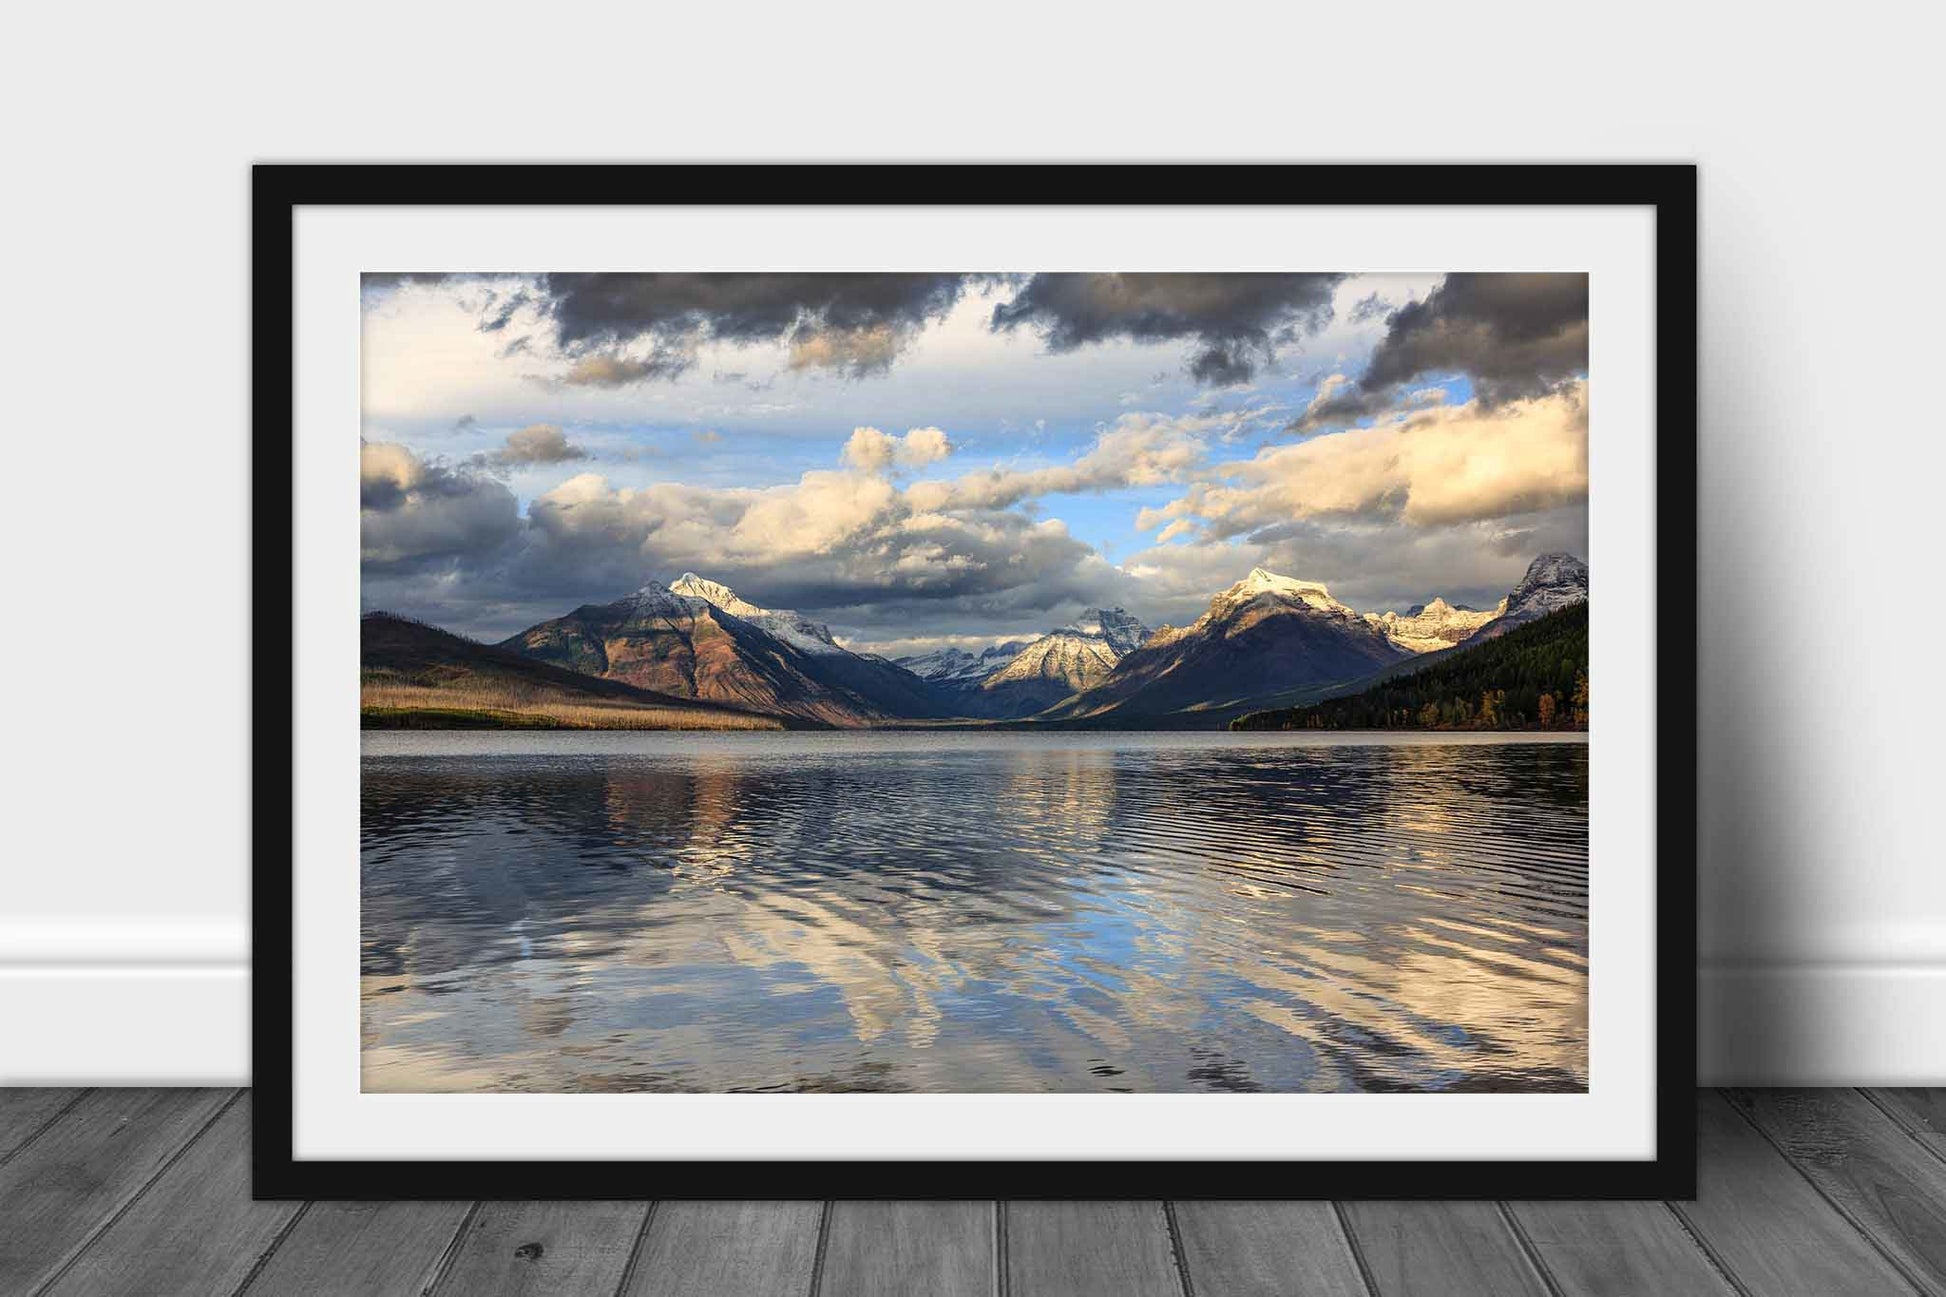 Framed and matted Glacier National Park print of snowy peaks overlooking Lake McDonald on an autumn evening in Montana by Sean Ramsey of Southern Plains Photography.